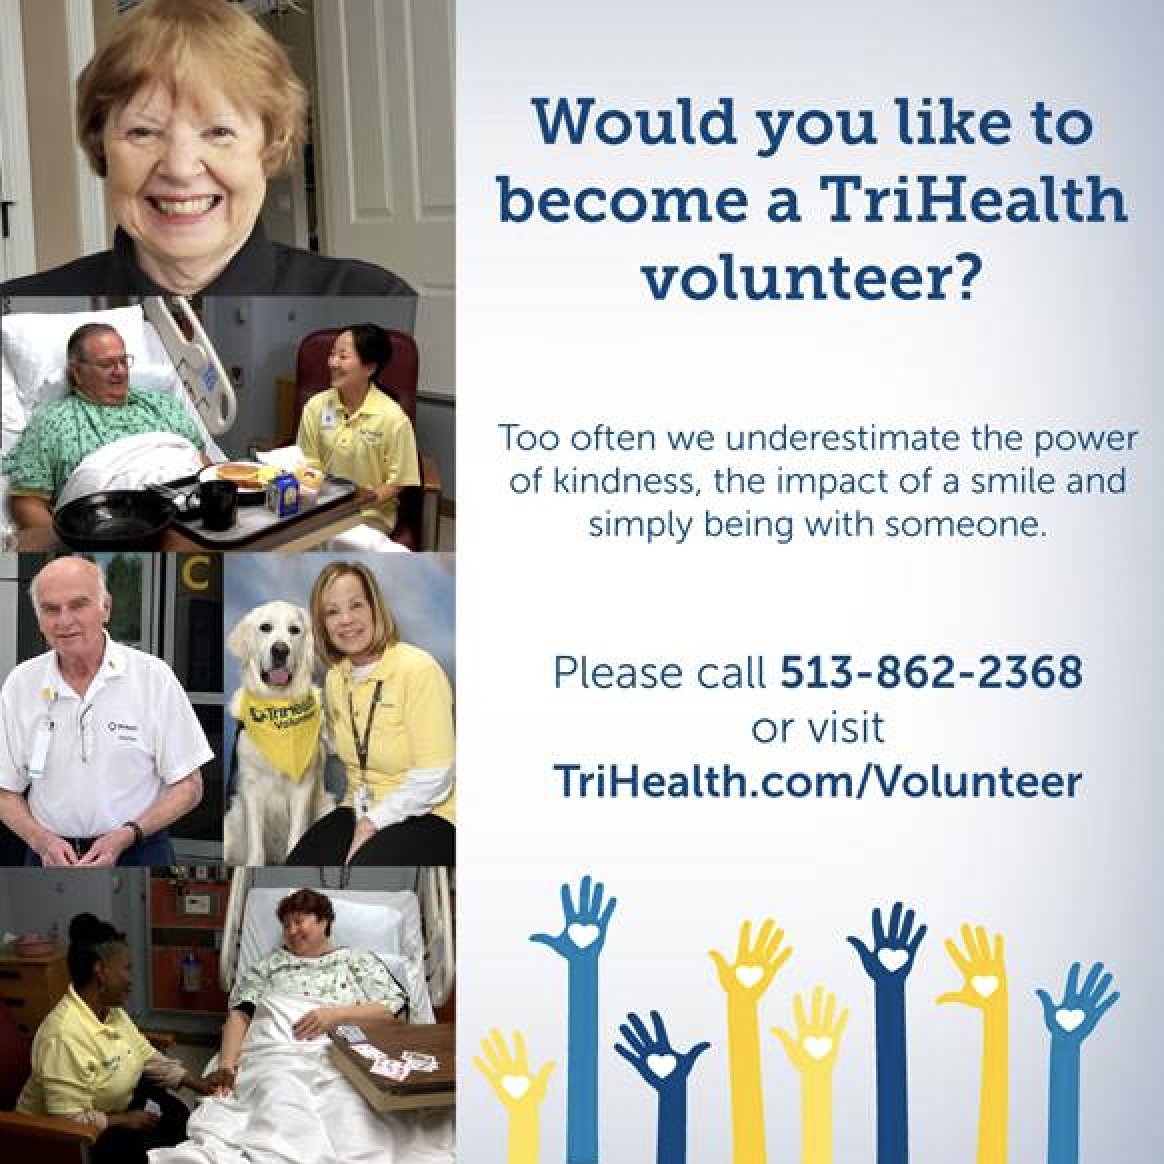 During this National Volunteer Week, we wanted to take the opportunity to shoutout the nearly 800 volunteers who selflessly give their time and talents in service to patients throughout the TriHealth system - thank you all so much! Learn more today: bit.ly/40zpSW2